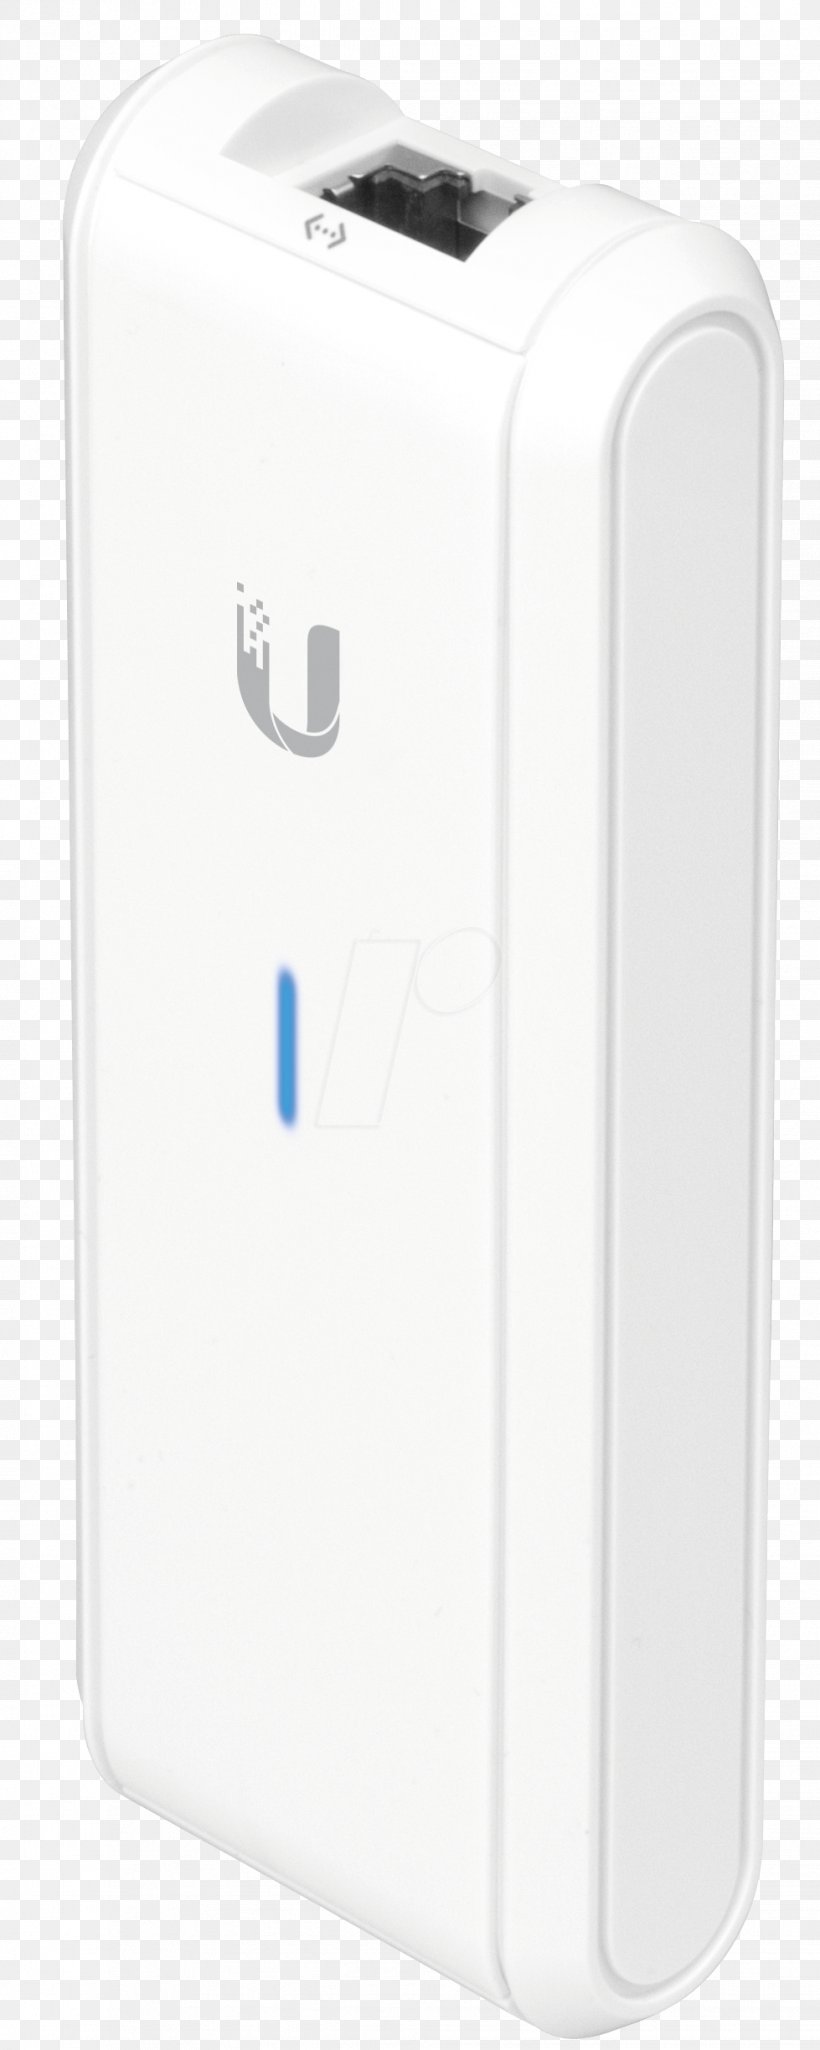 Ubiquiti Networks Wireless Access Points Computer Network Cloud Computing Unifi, PNG, 979x2448px, Ubiquiti Networks, Calvin Klein, Cloud Computing, Cloud Storage, Computer Network Download Free